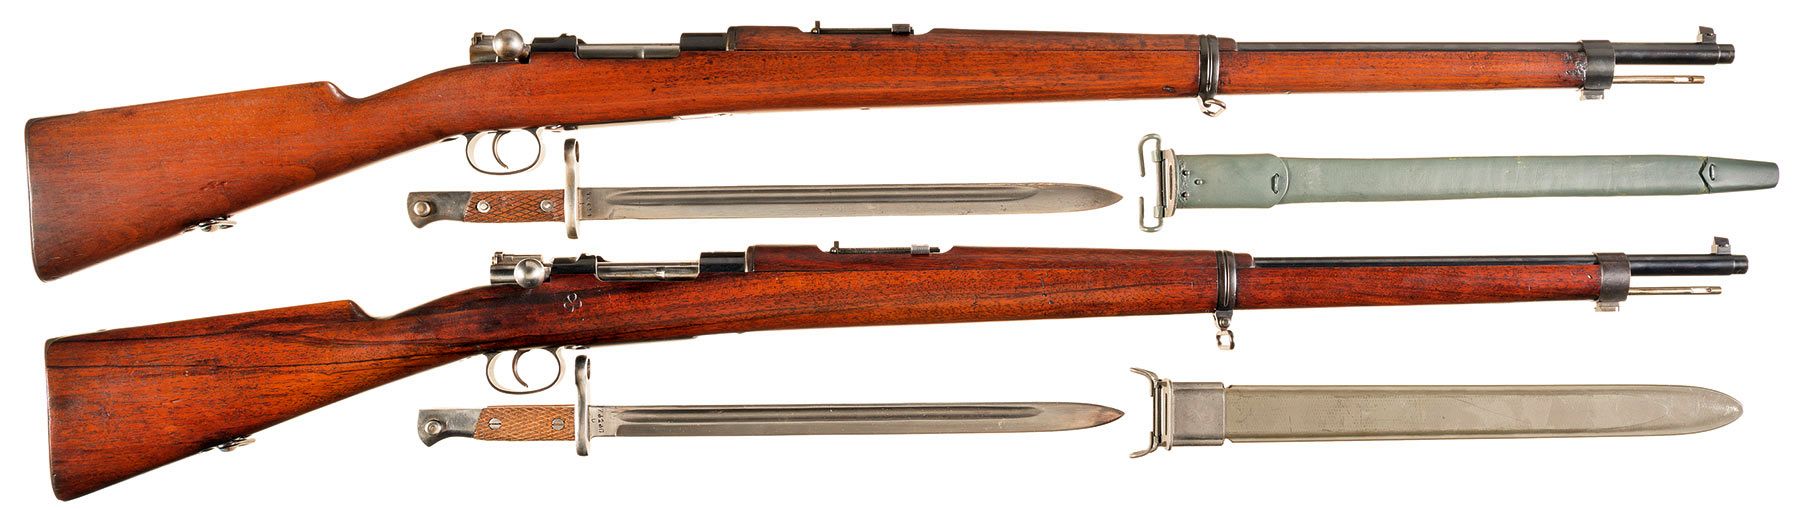 1893 spanish mauser serial numbers